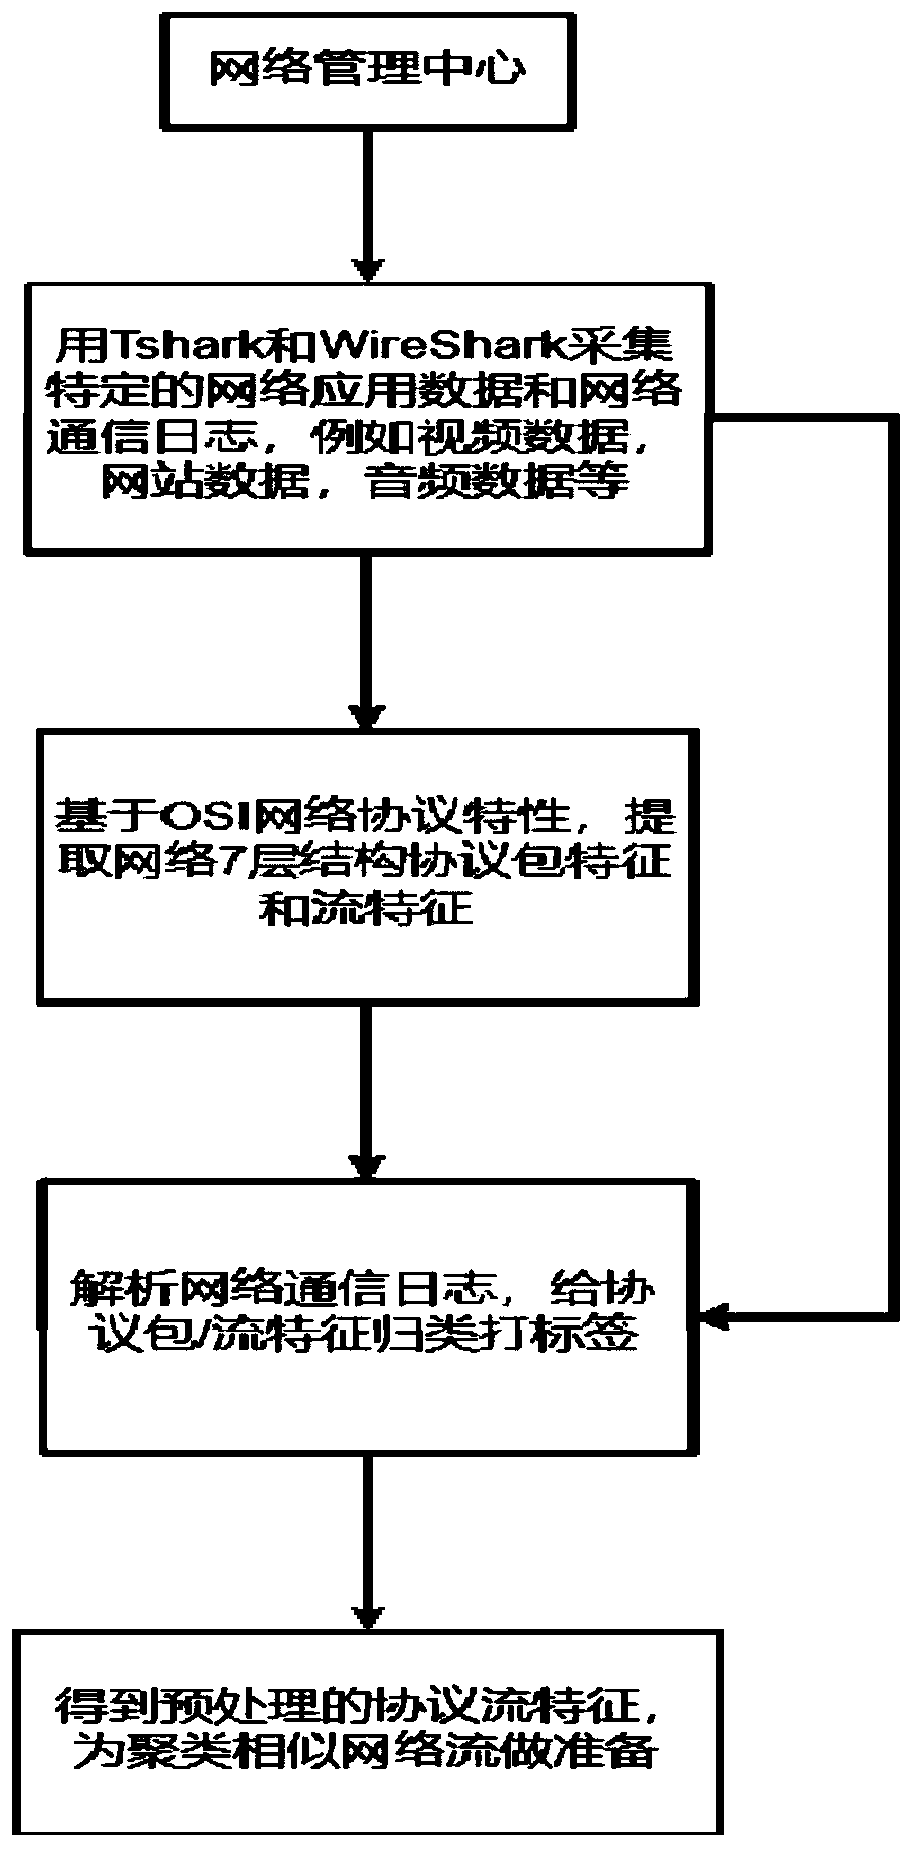 Network flow classification method and device based on serialized protocol flow characteristics